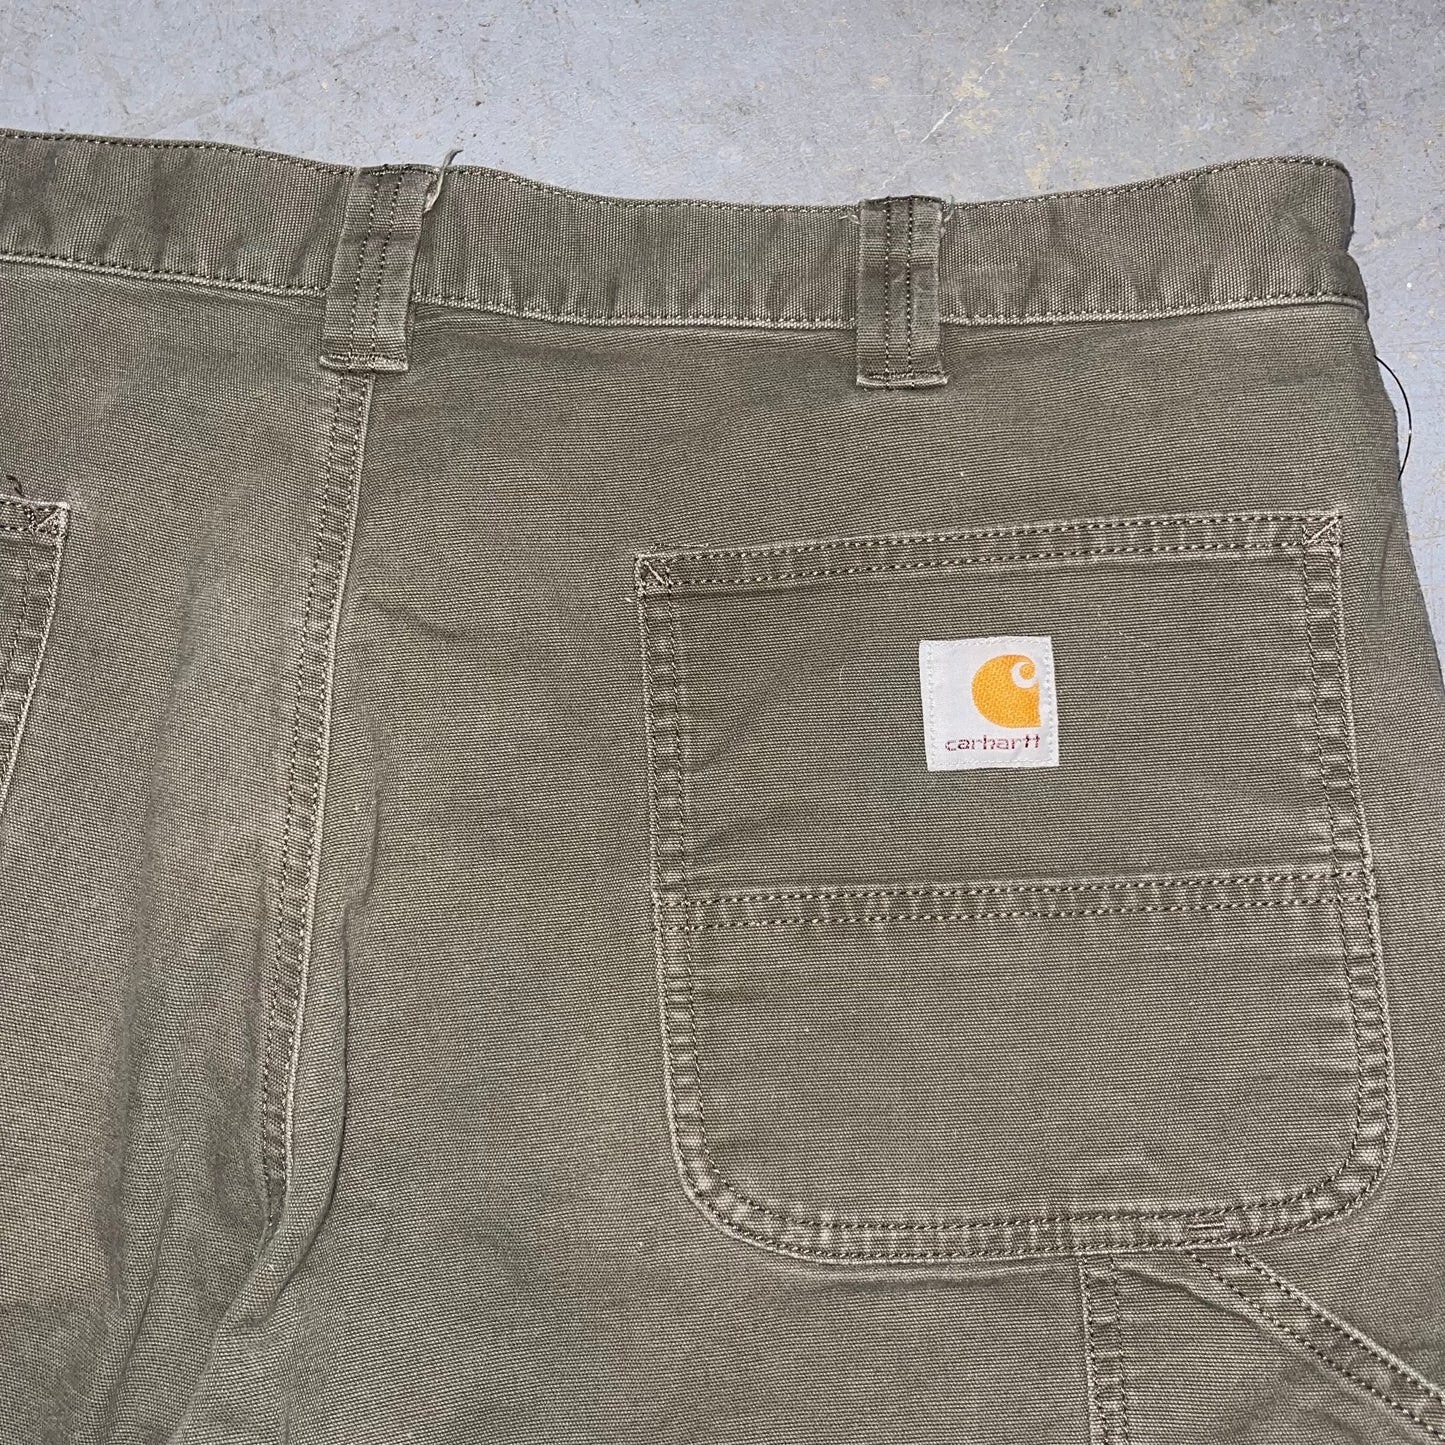 Carhartt Carpenter Relaxed Fit Shorts. Size 38